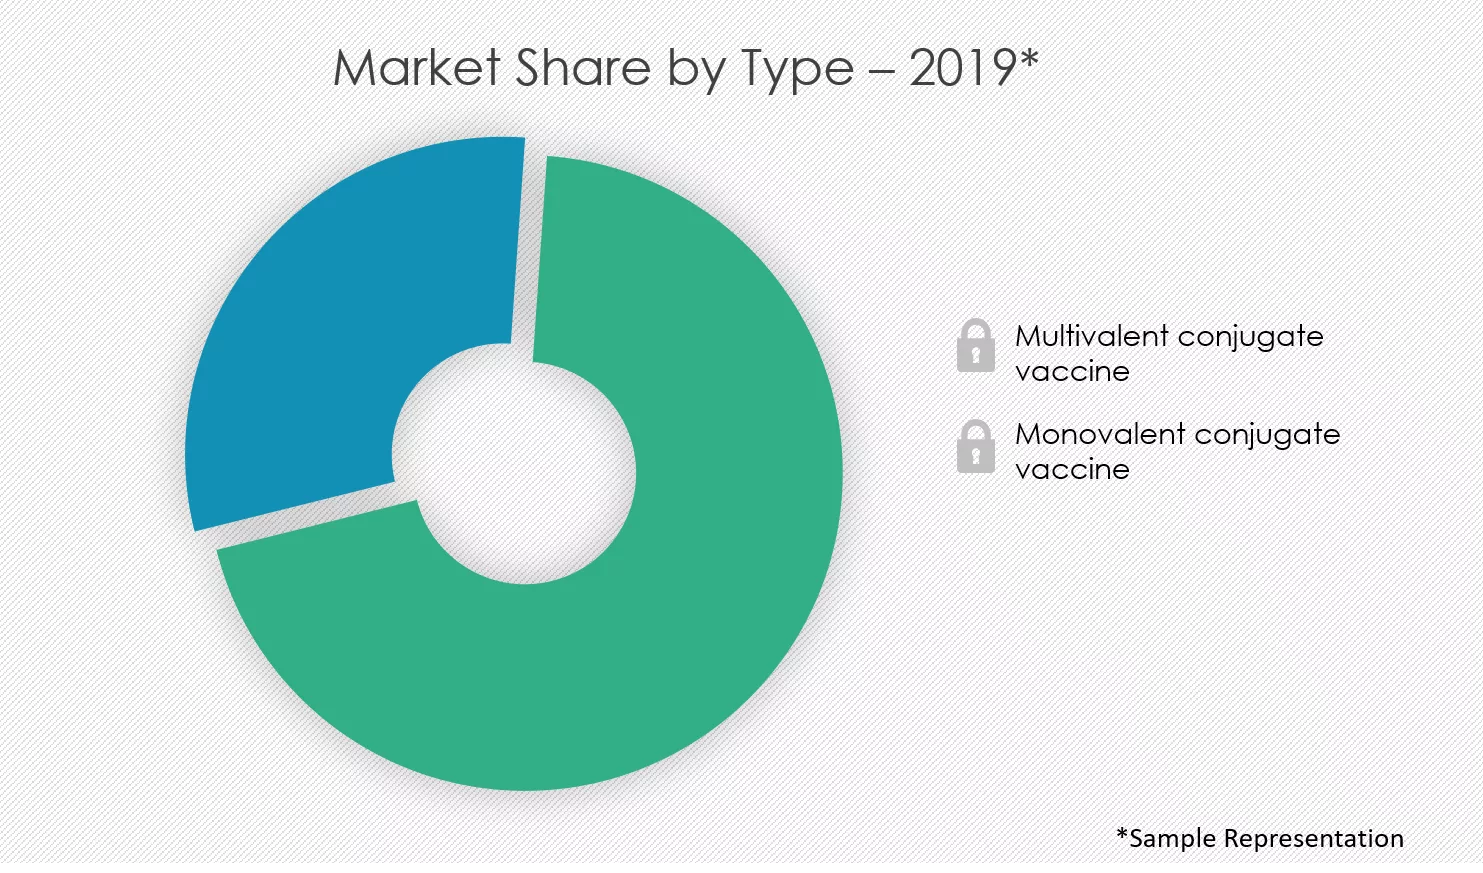 Conjugate-Vaccines-Market-Share-by-Type